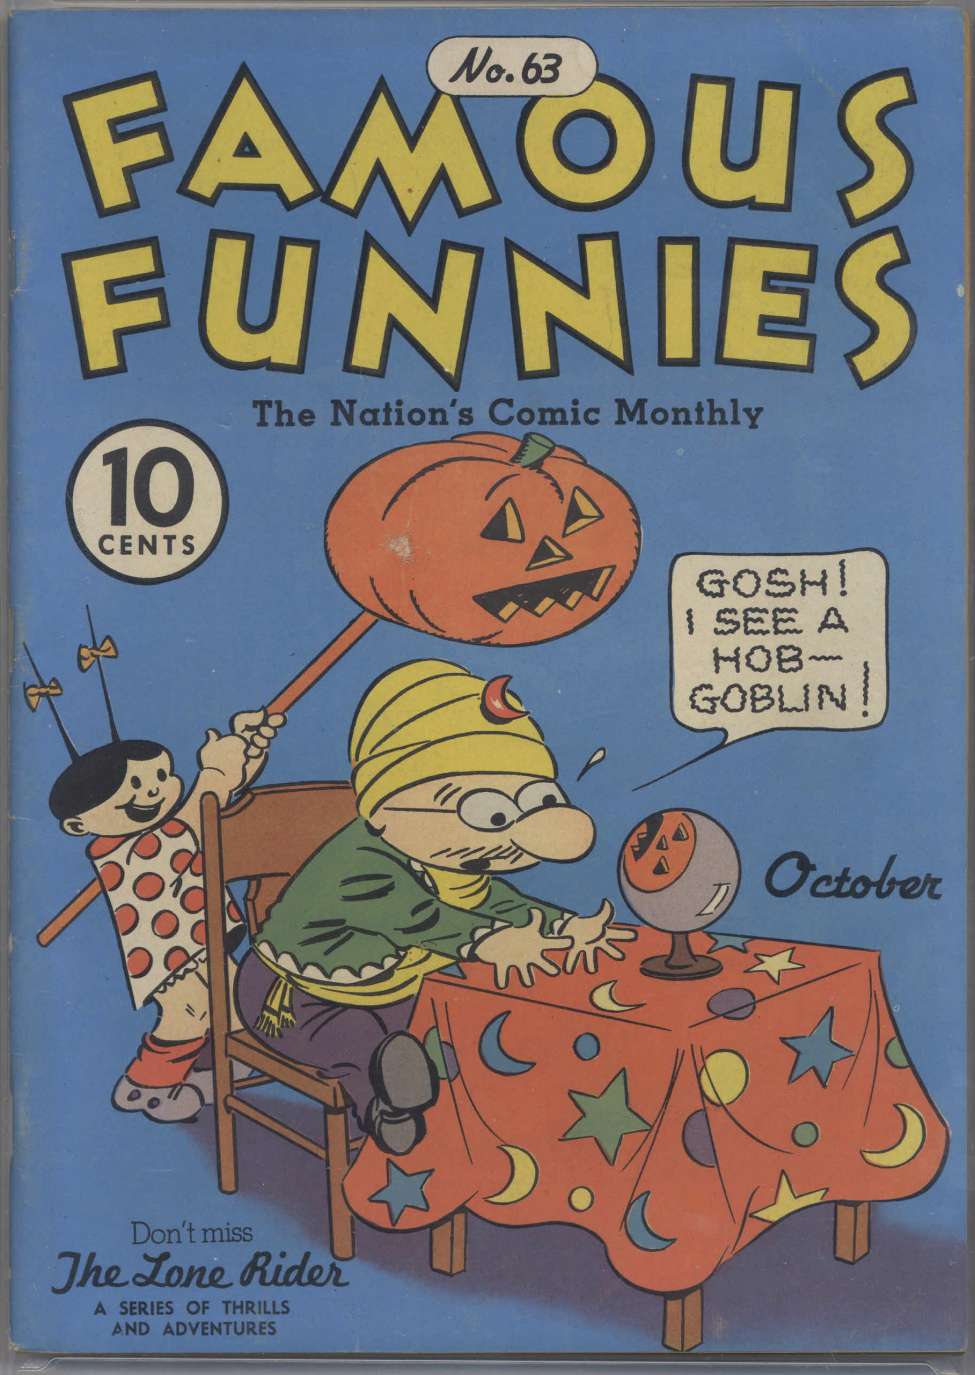 Comic Book Cover For Famous Funnies 63 - Version 1